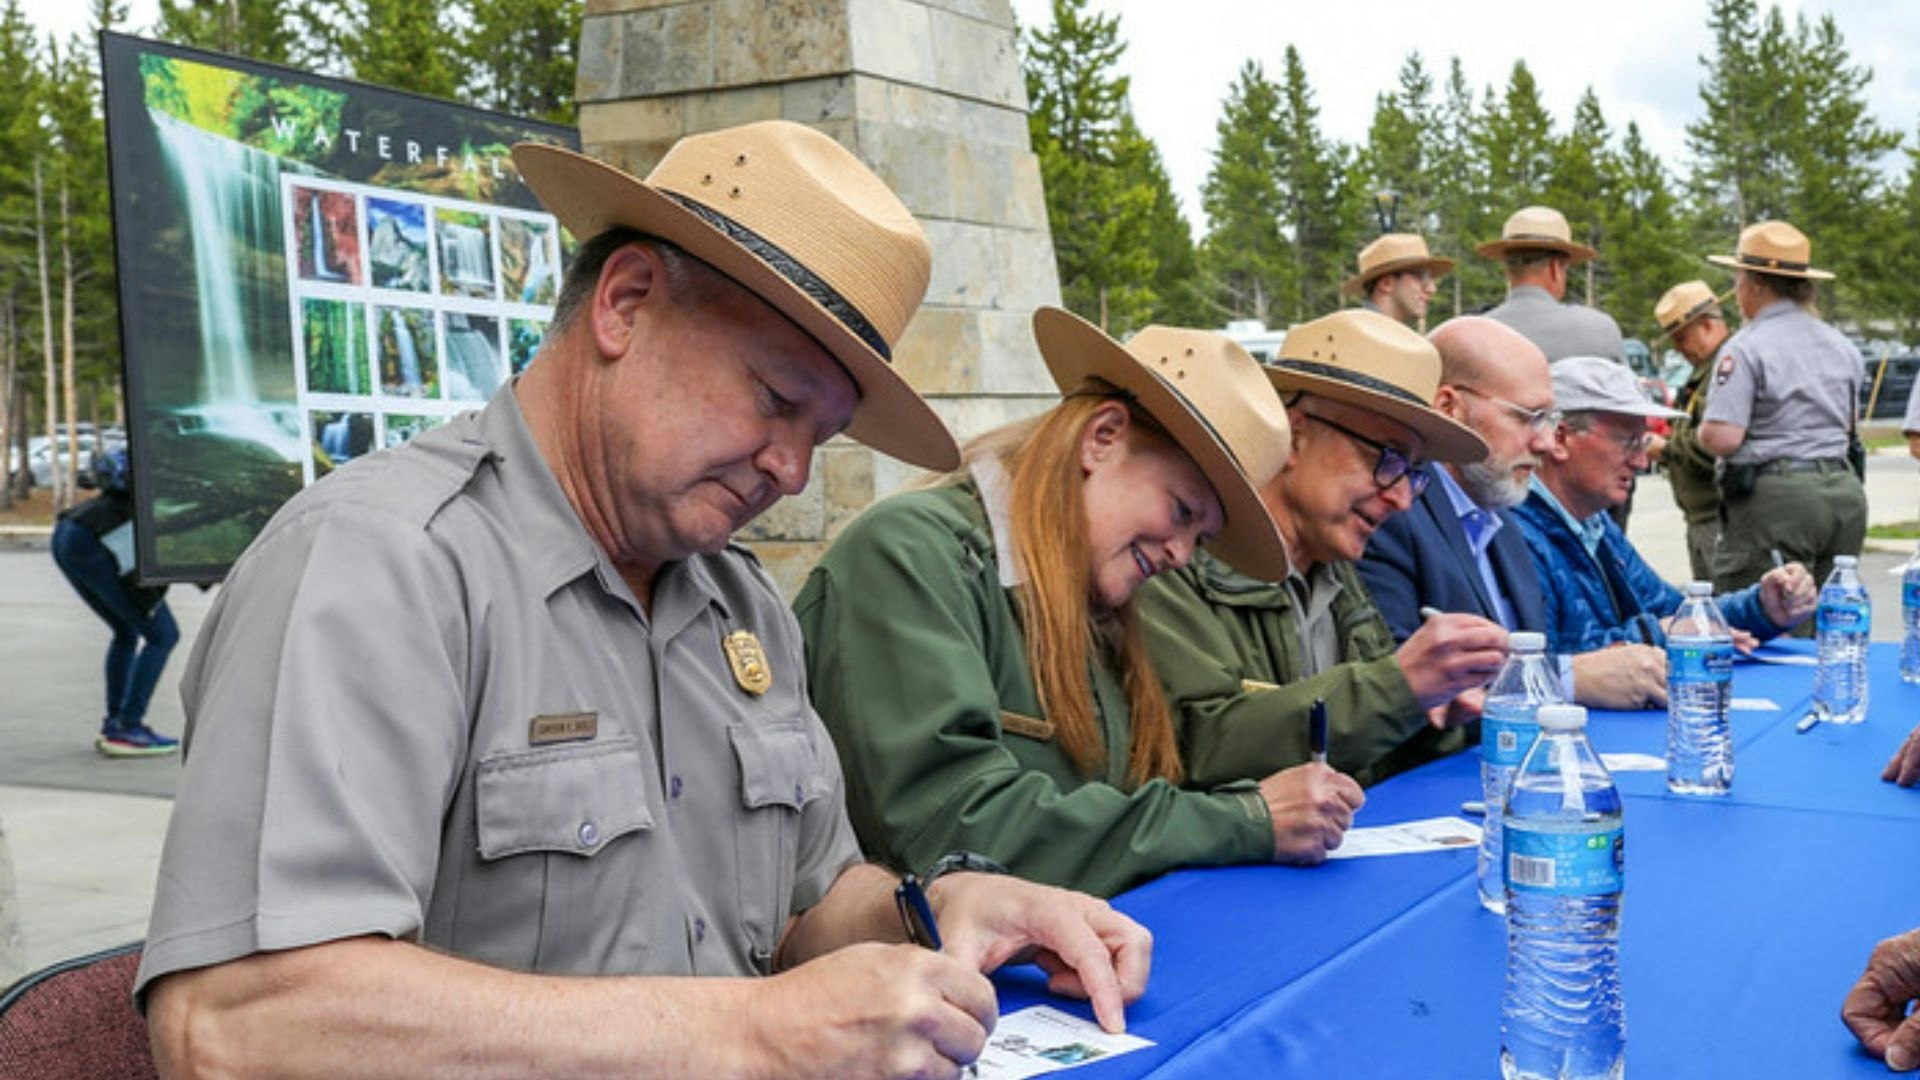 Yellowstone Superintendent Cam Sholly says a shortage of workers is impacting the park's ability to serve as many as 4 million annual visitors.